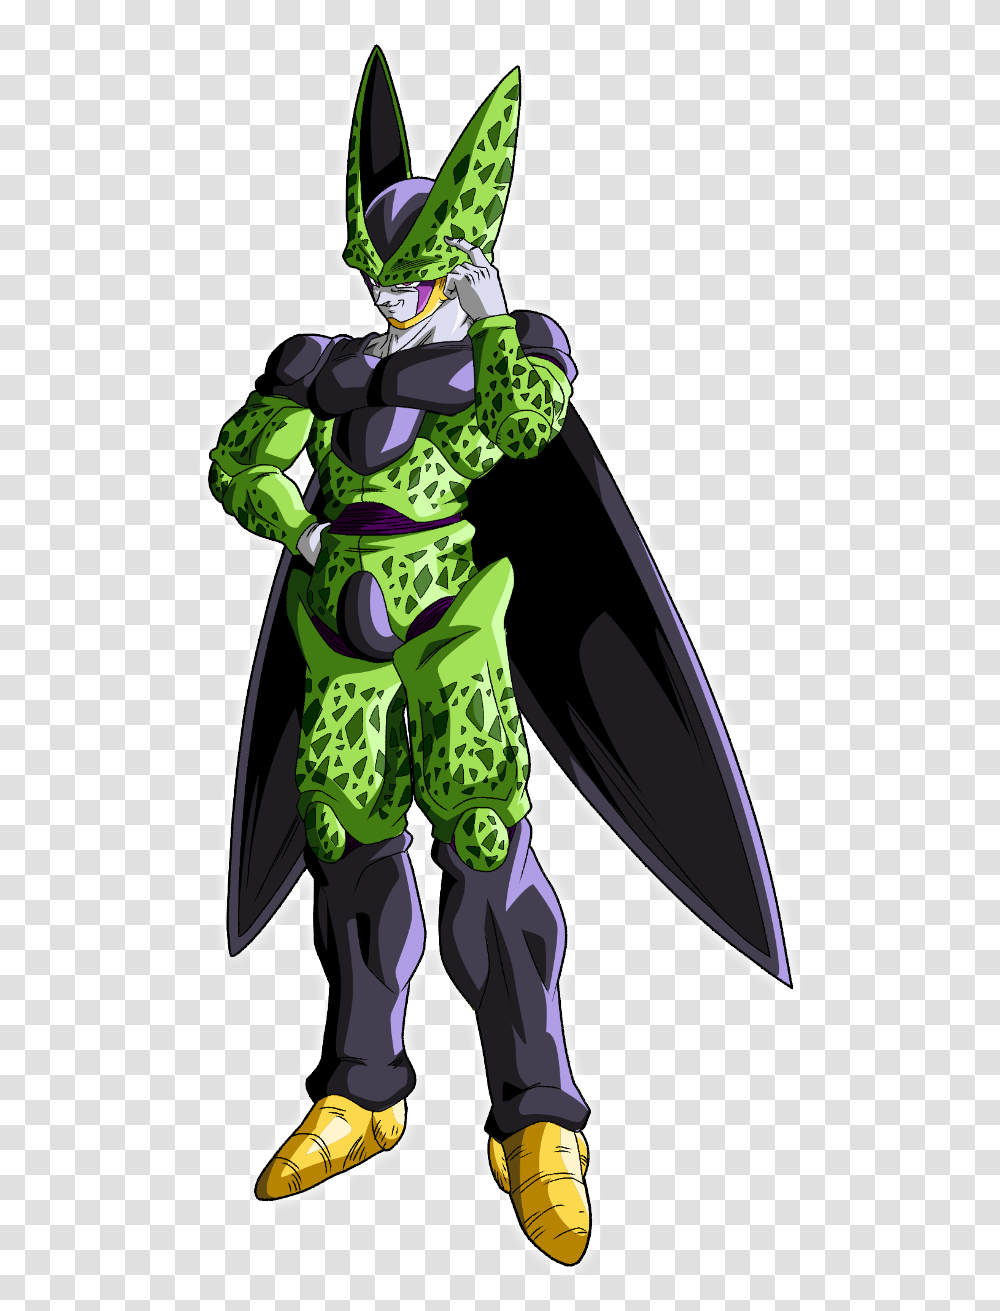 Cell Dragon Ball Dragon Ball Z Image 2503282 Cell Dragon Ball Z Render, Person, Human, Duel, Hand Transparent Png